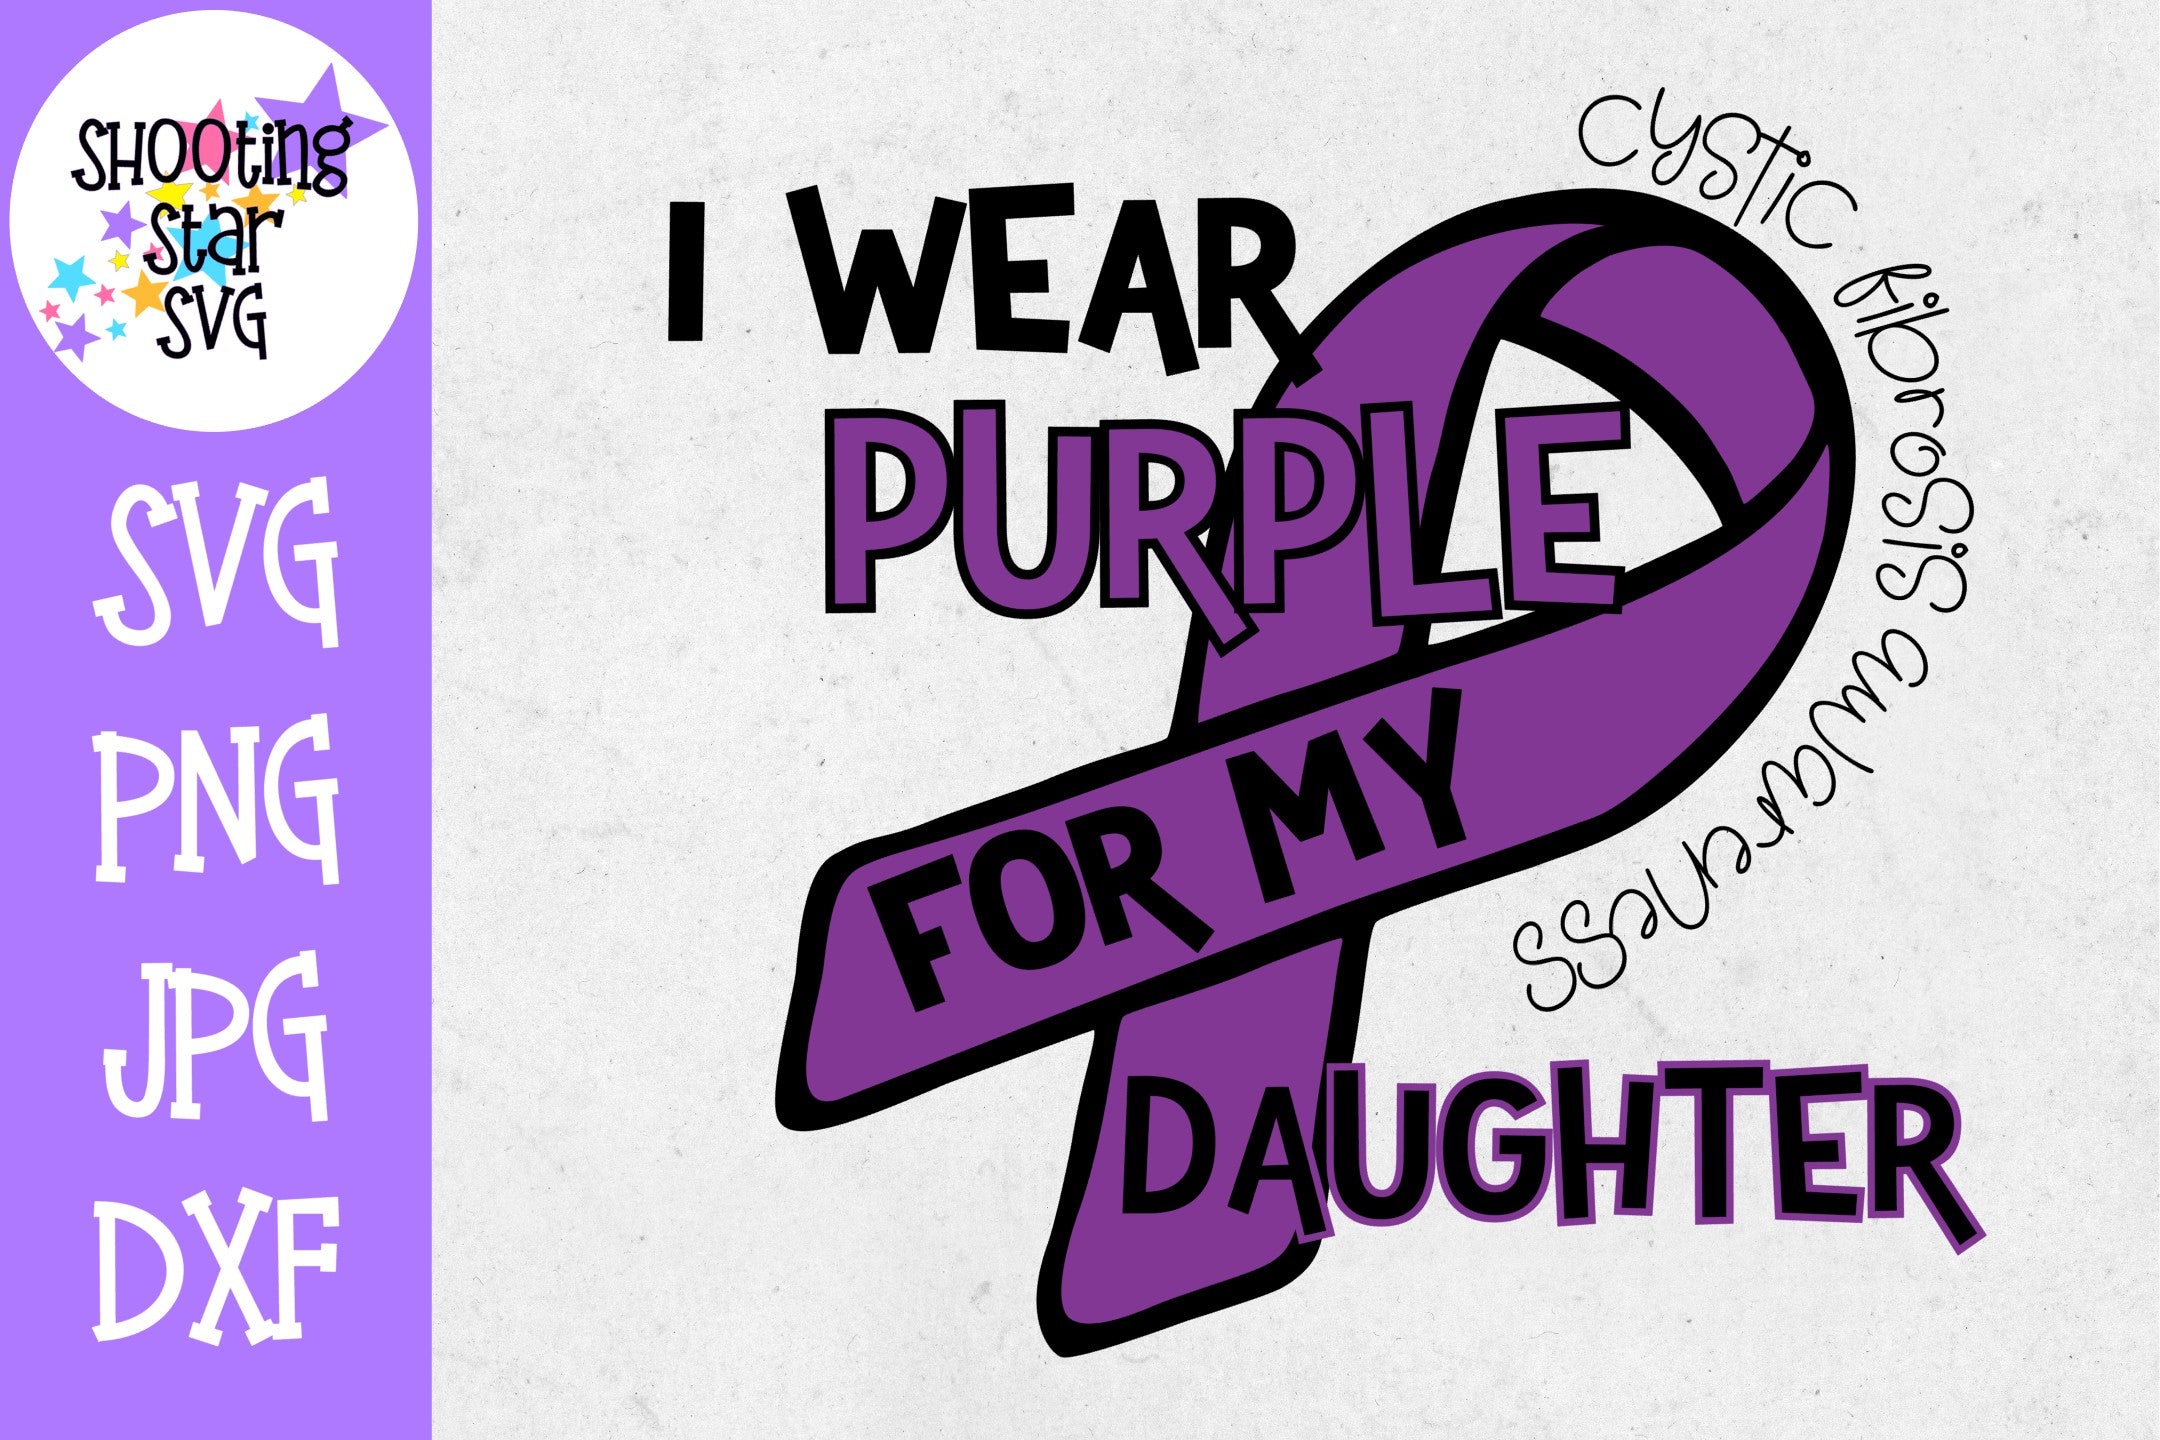 I Wear Purple for my Daughter - Cystic Fibrosis SVG